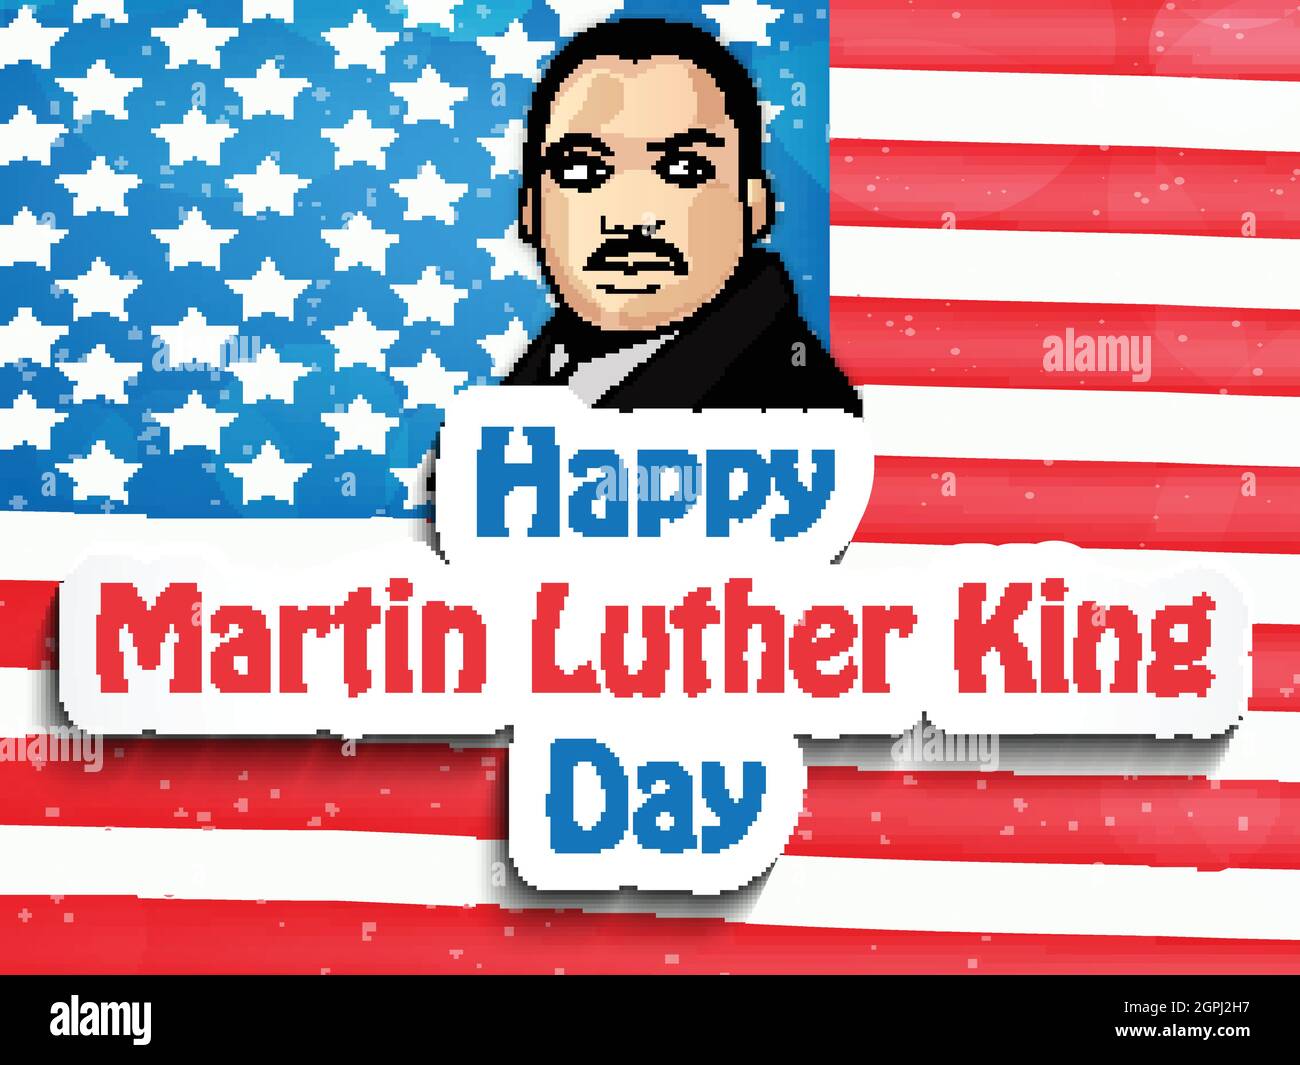 Martin Luther King Day Stock Vector